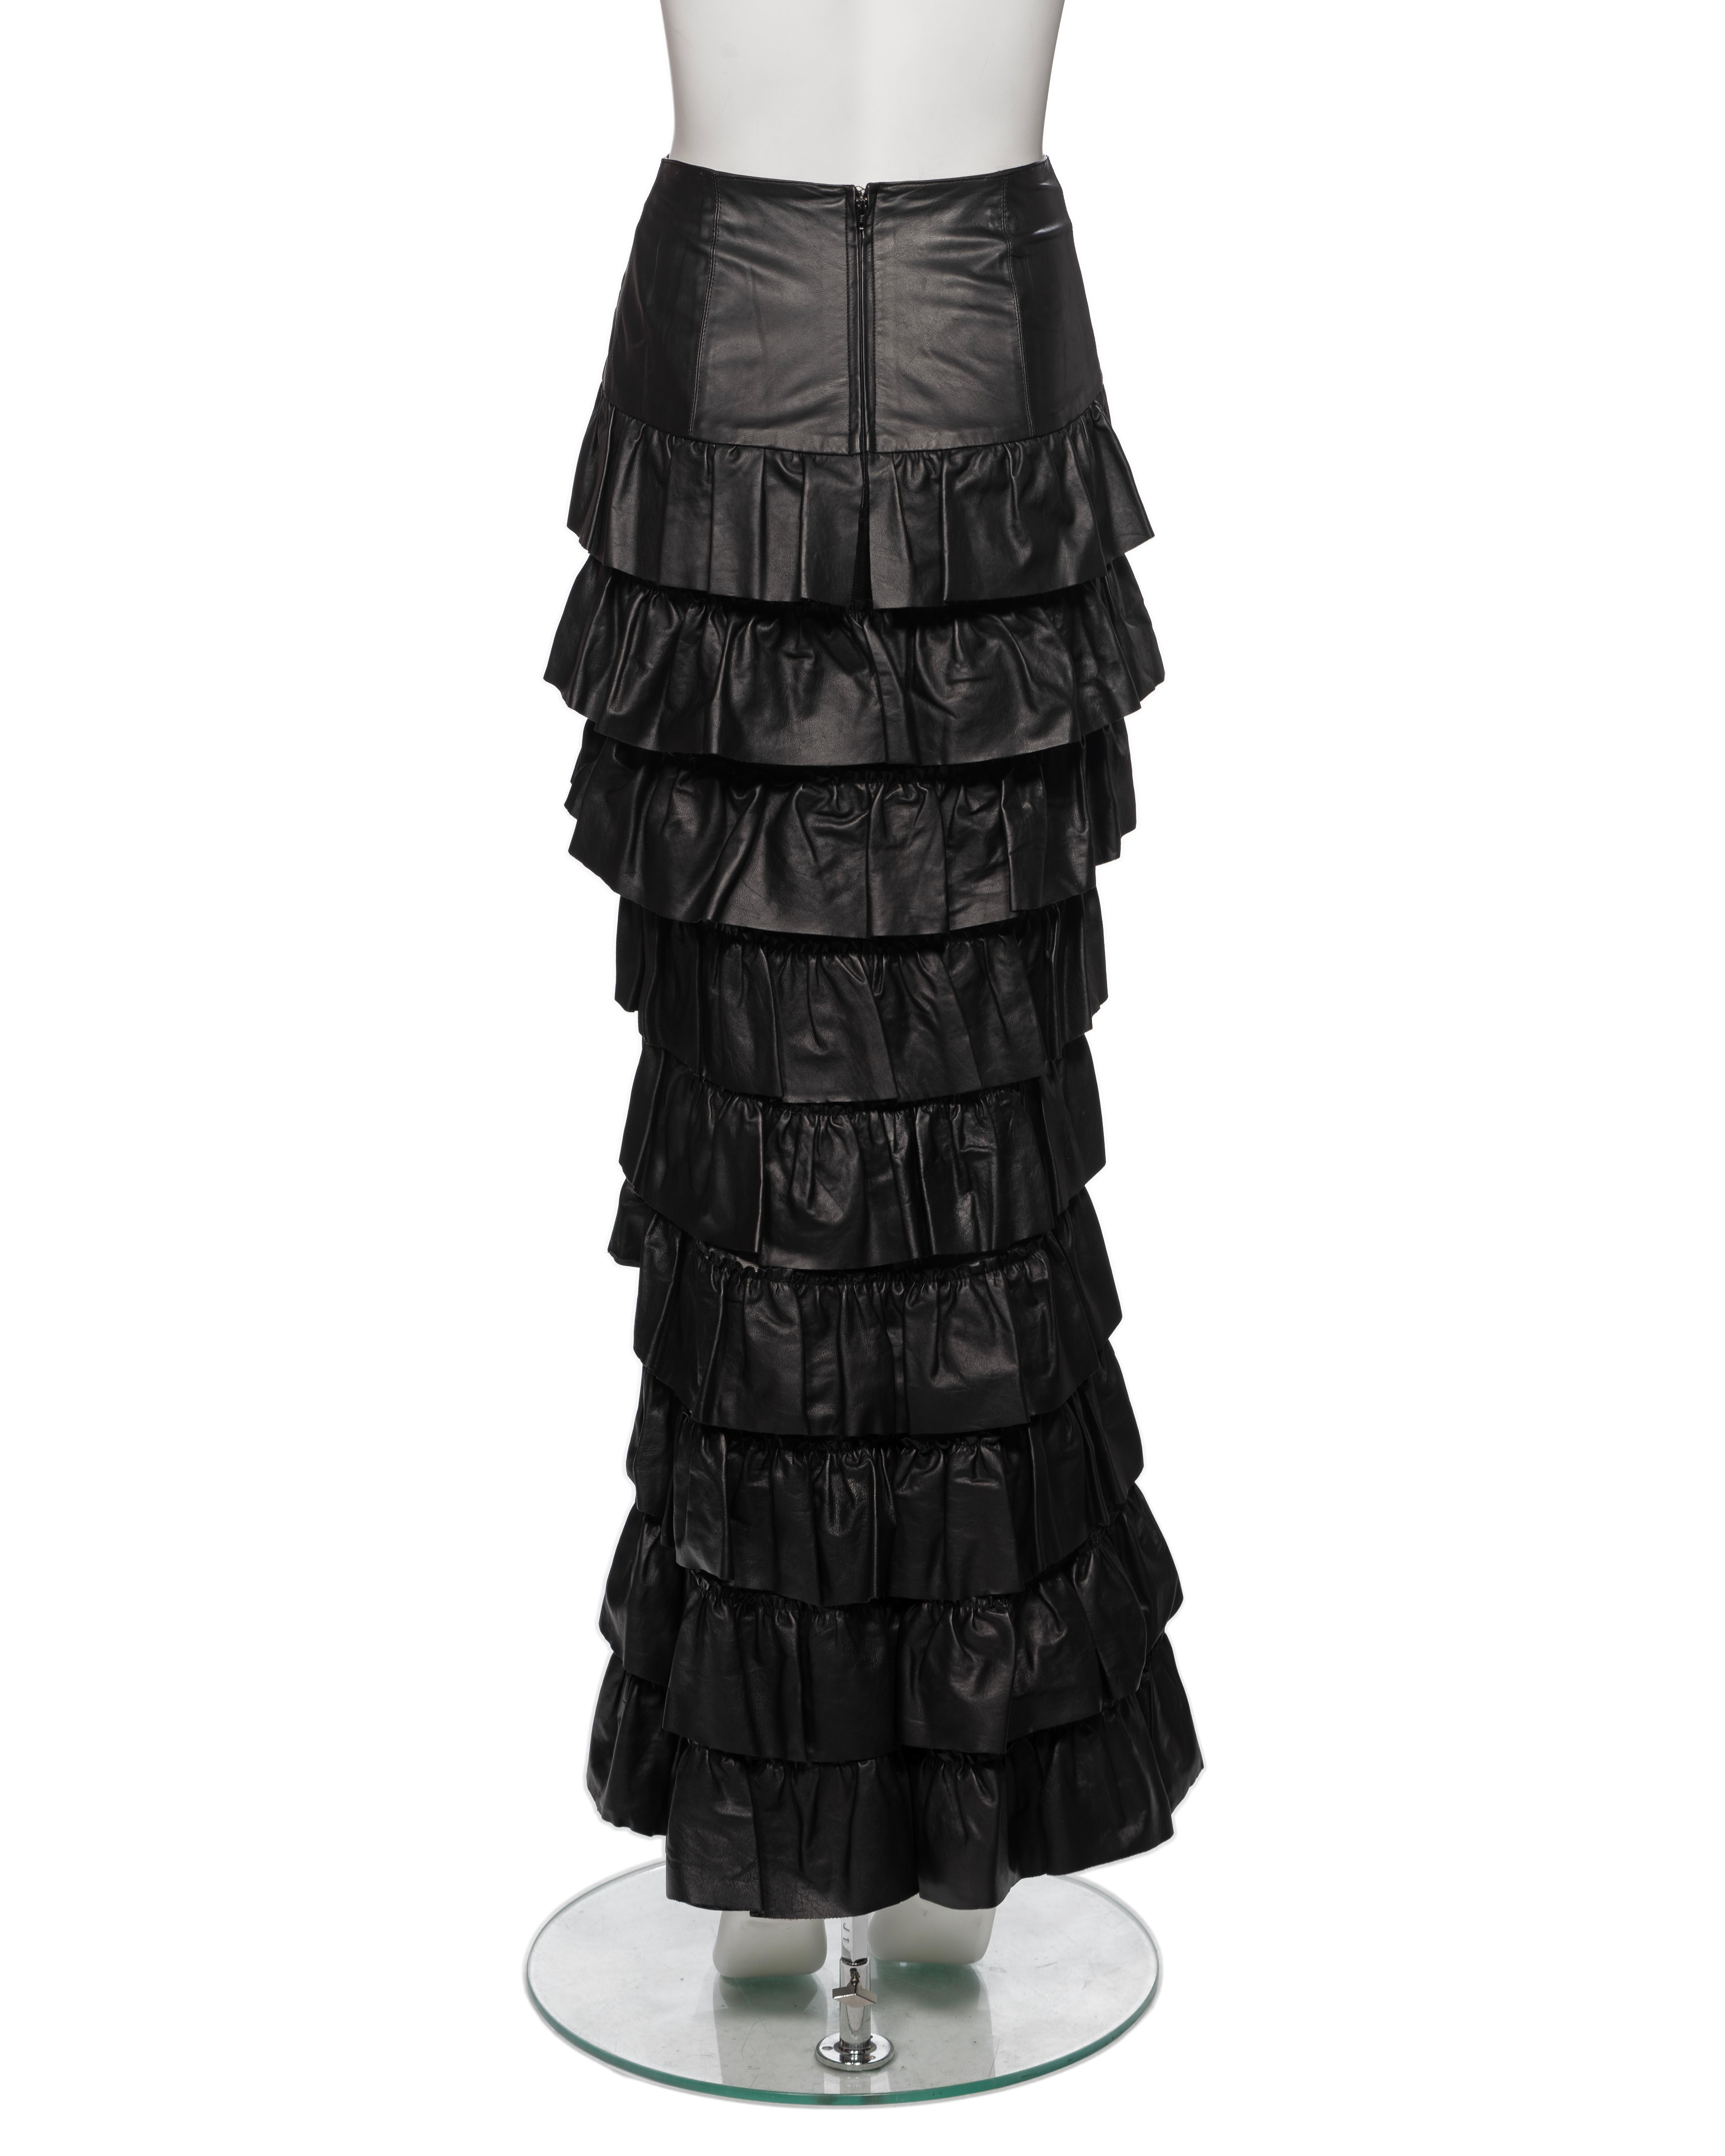 Chanel by Karl Lagerfeld Black Leather Tiered Ruffled Maxi Skirt, FW 2001 For Sale 6